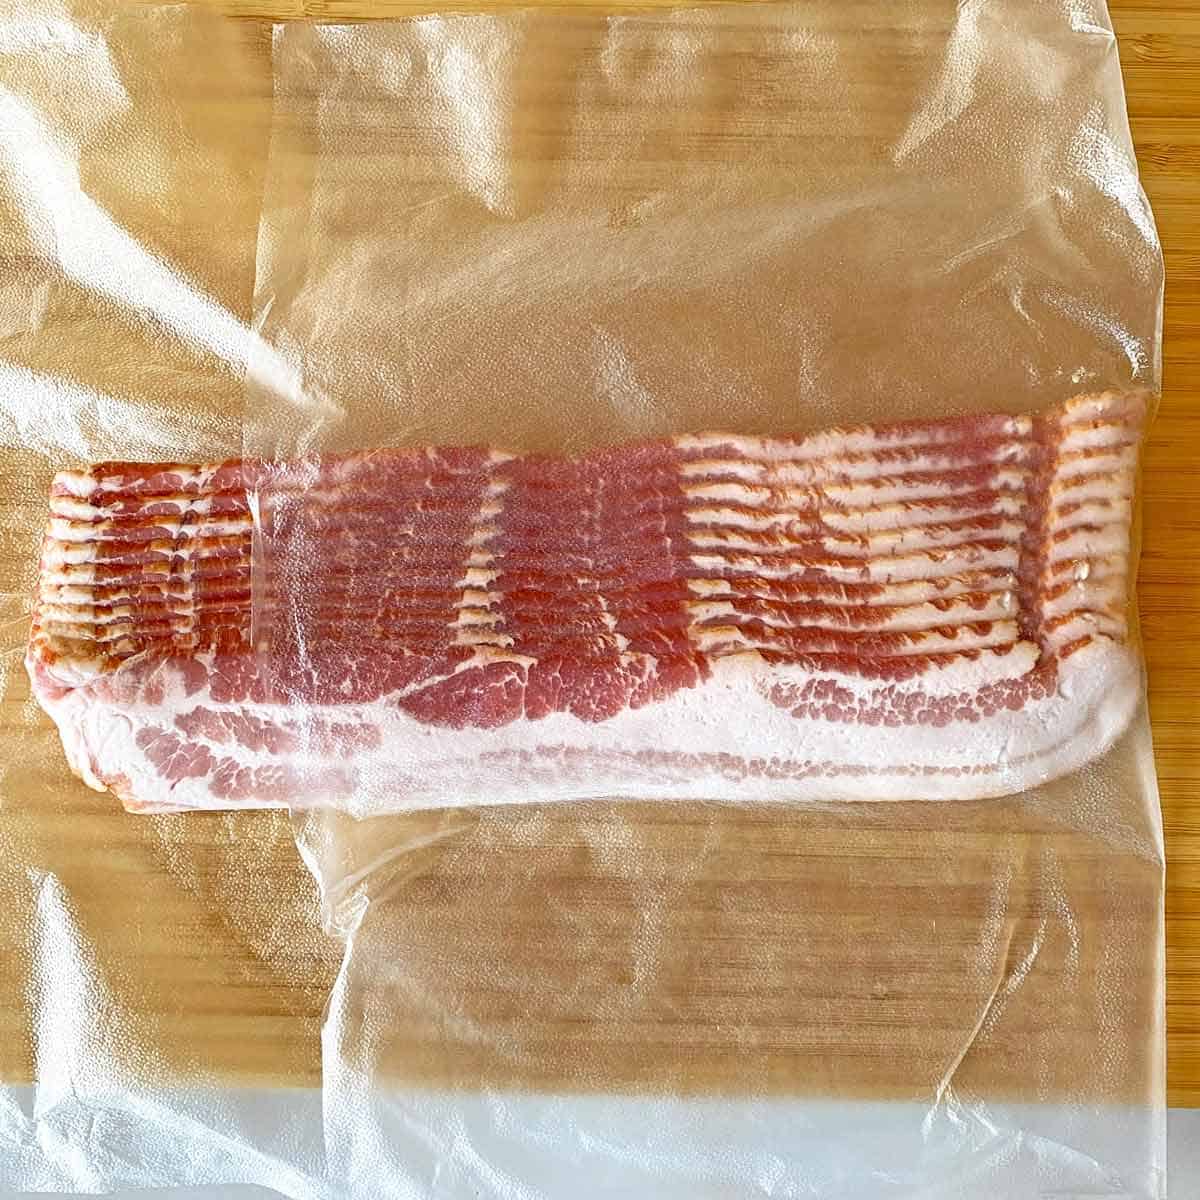 Wrapping a half pound of raw bacon slices in a sheet of plastic wrap.